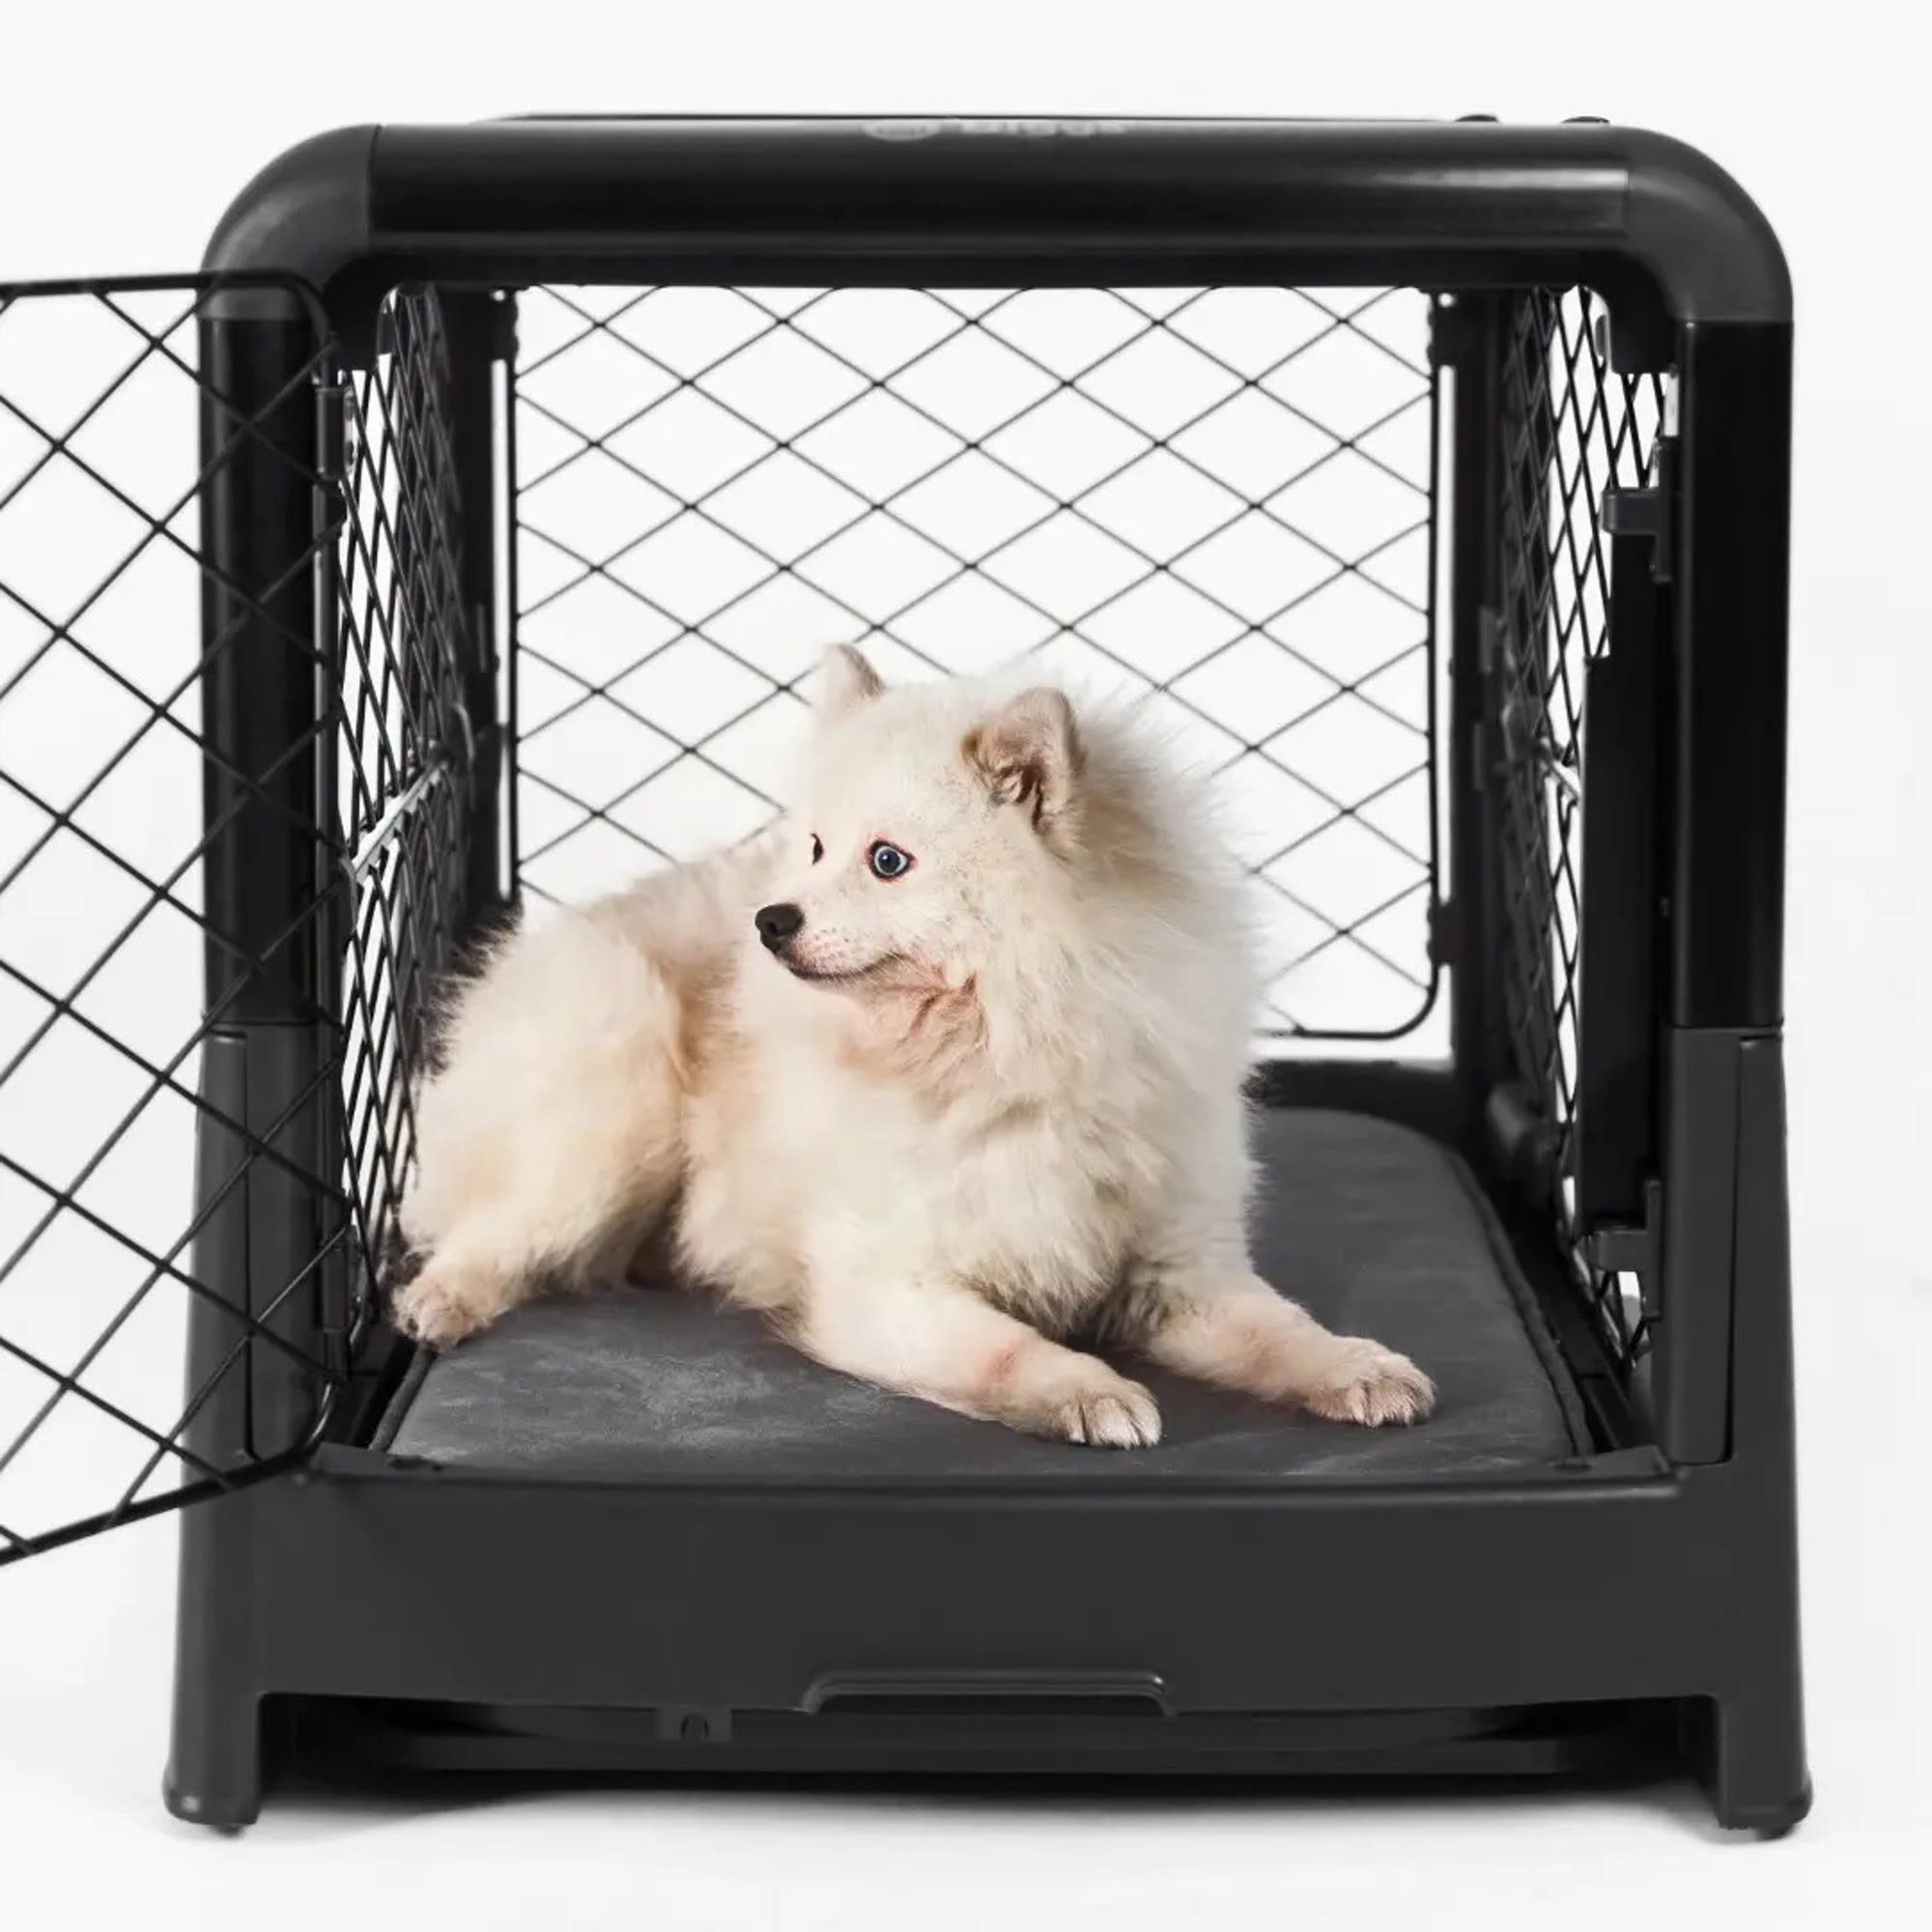 Diggs Charcoal Revol Double-Door Collapsible Dog Crate with Tray and Divider